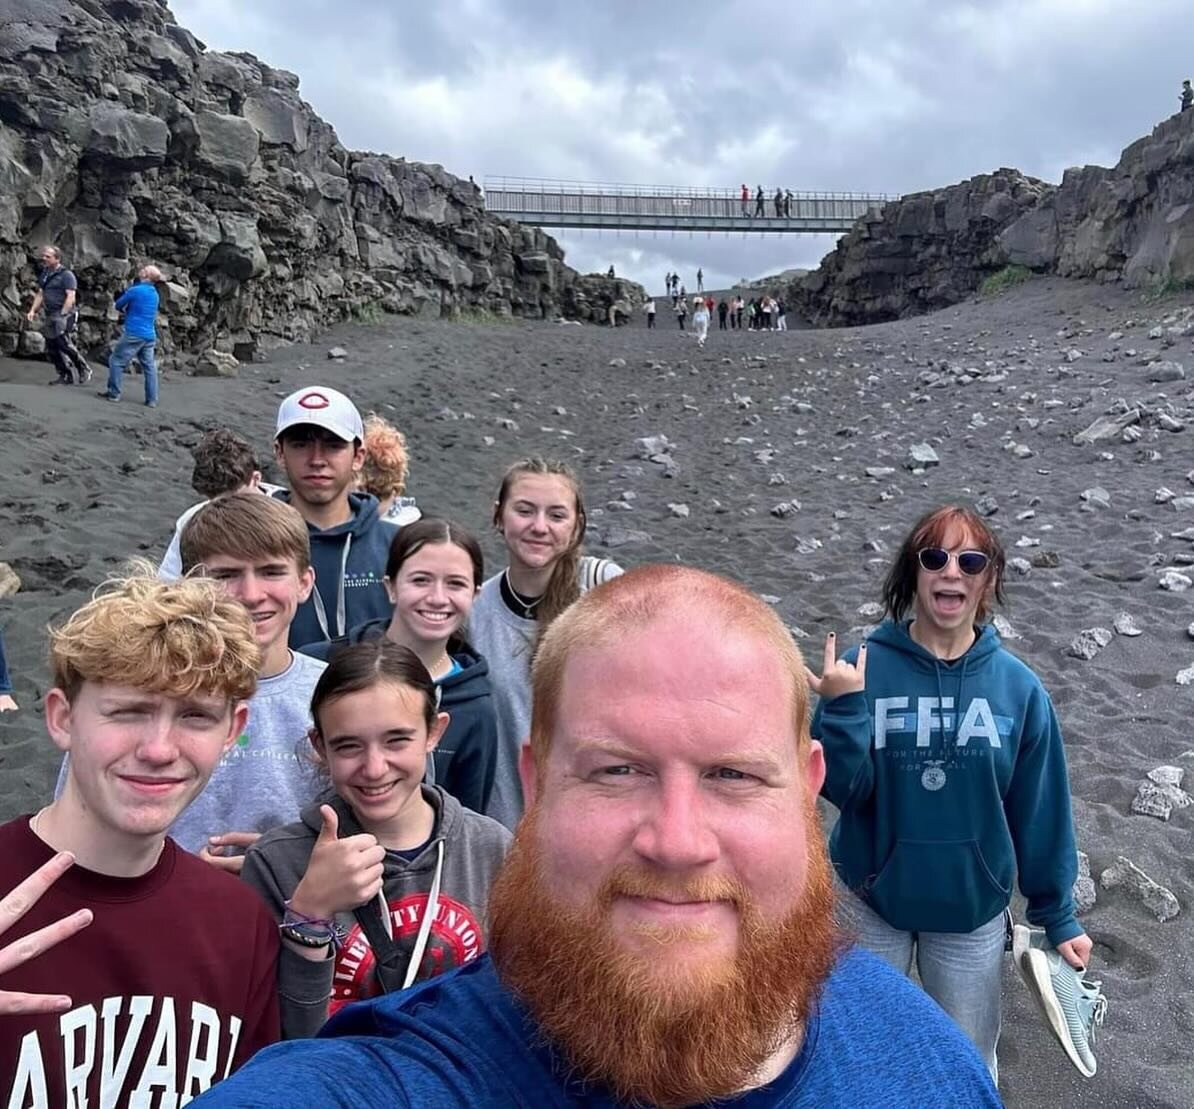 We believe our students&rsquo; experience is what it is all about and we partner with teachers who believe in the same! 

Here are 5 reasons that our teacher-leaders have decided to partner with us for their educational tours&hellip;

1. We offer a w